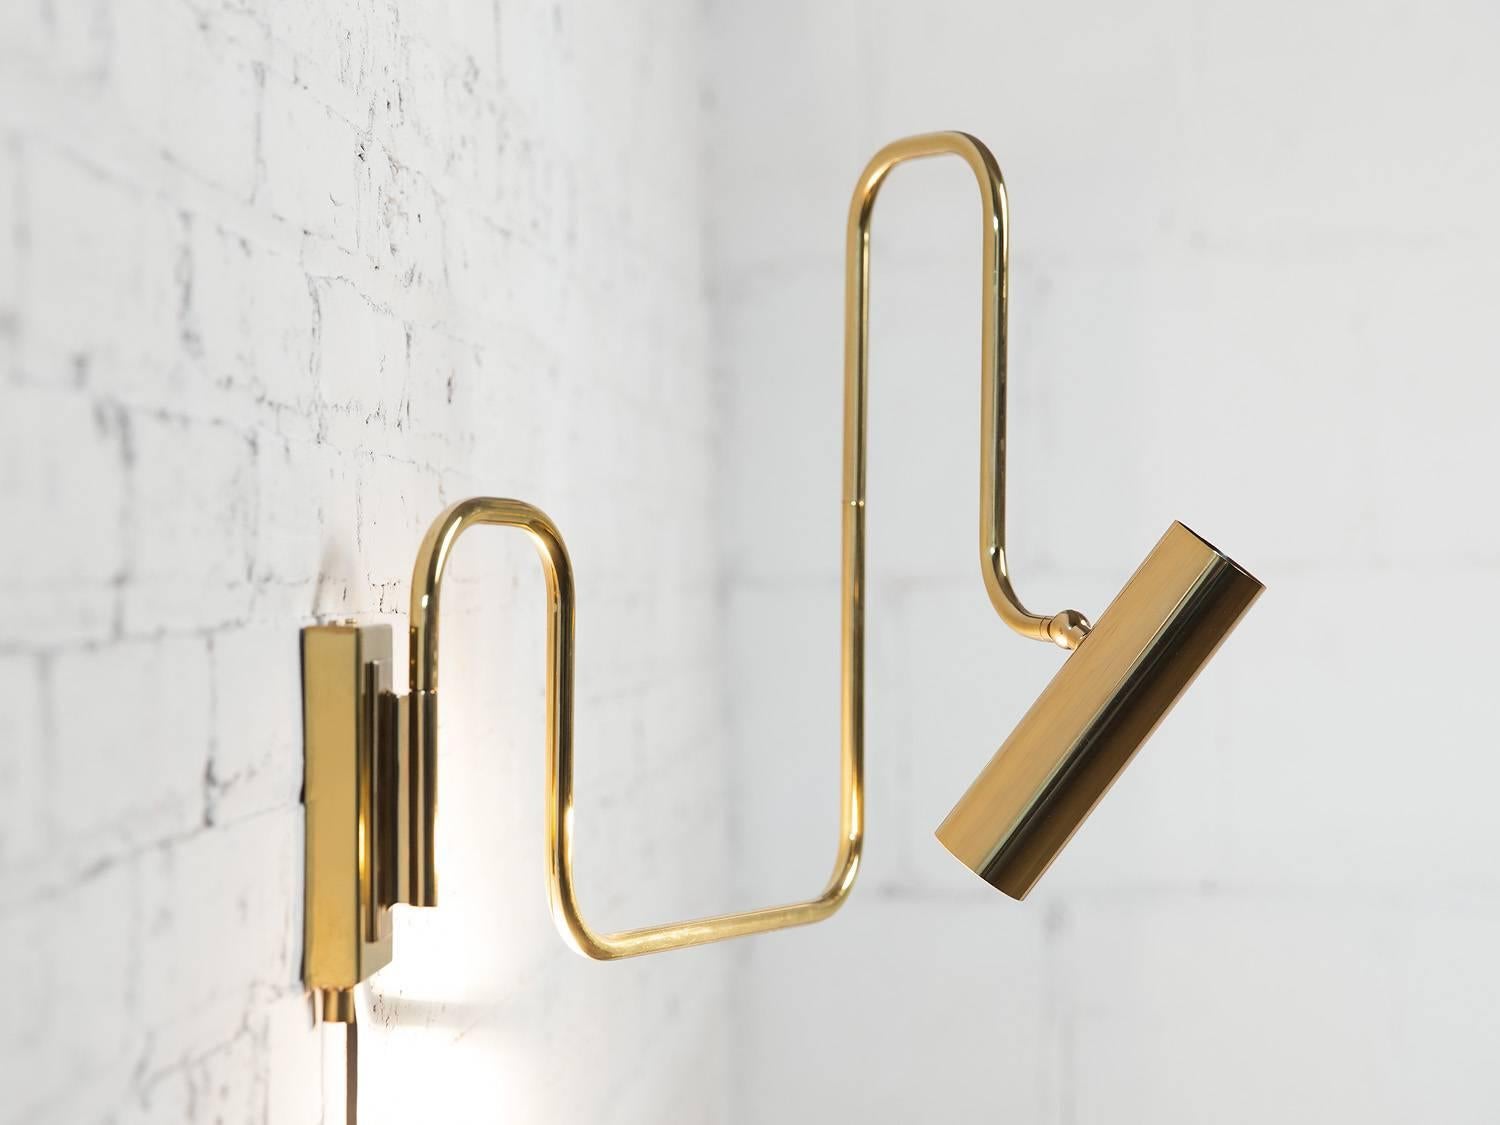 Modern Pivot Single Wall Sconce with Articulating Arms in Polished Tarnished Brass For Sale